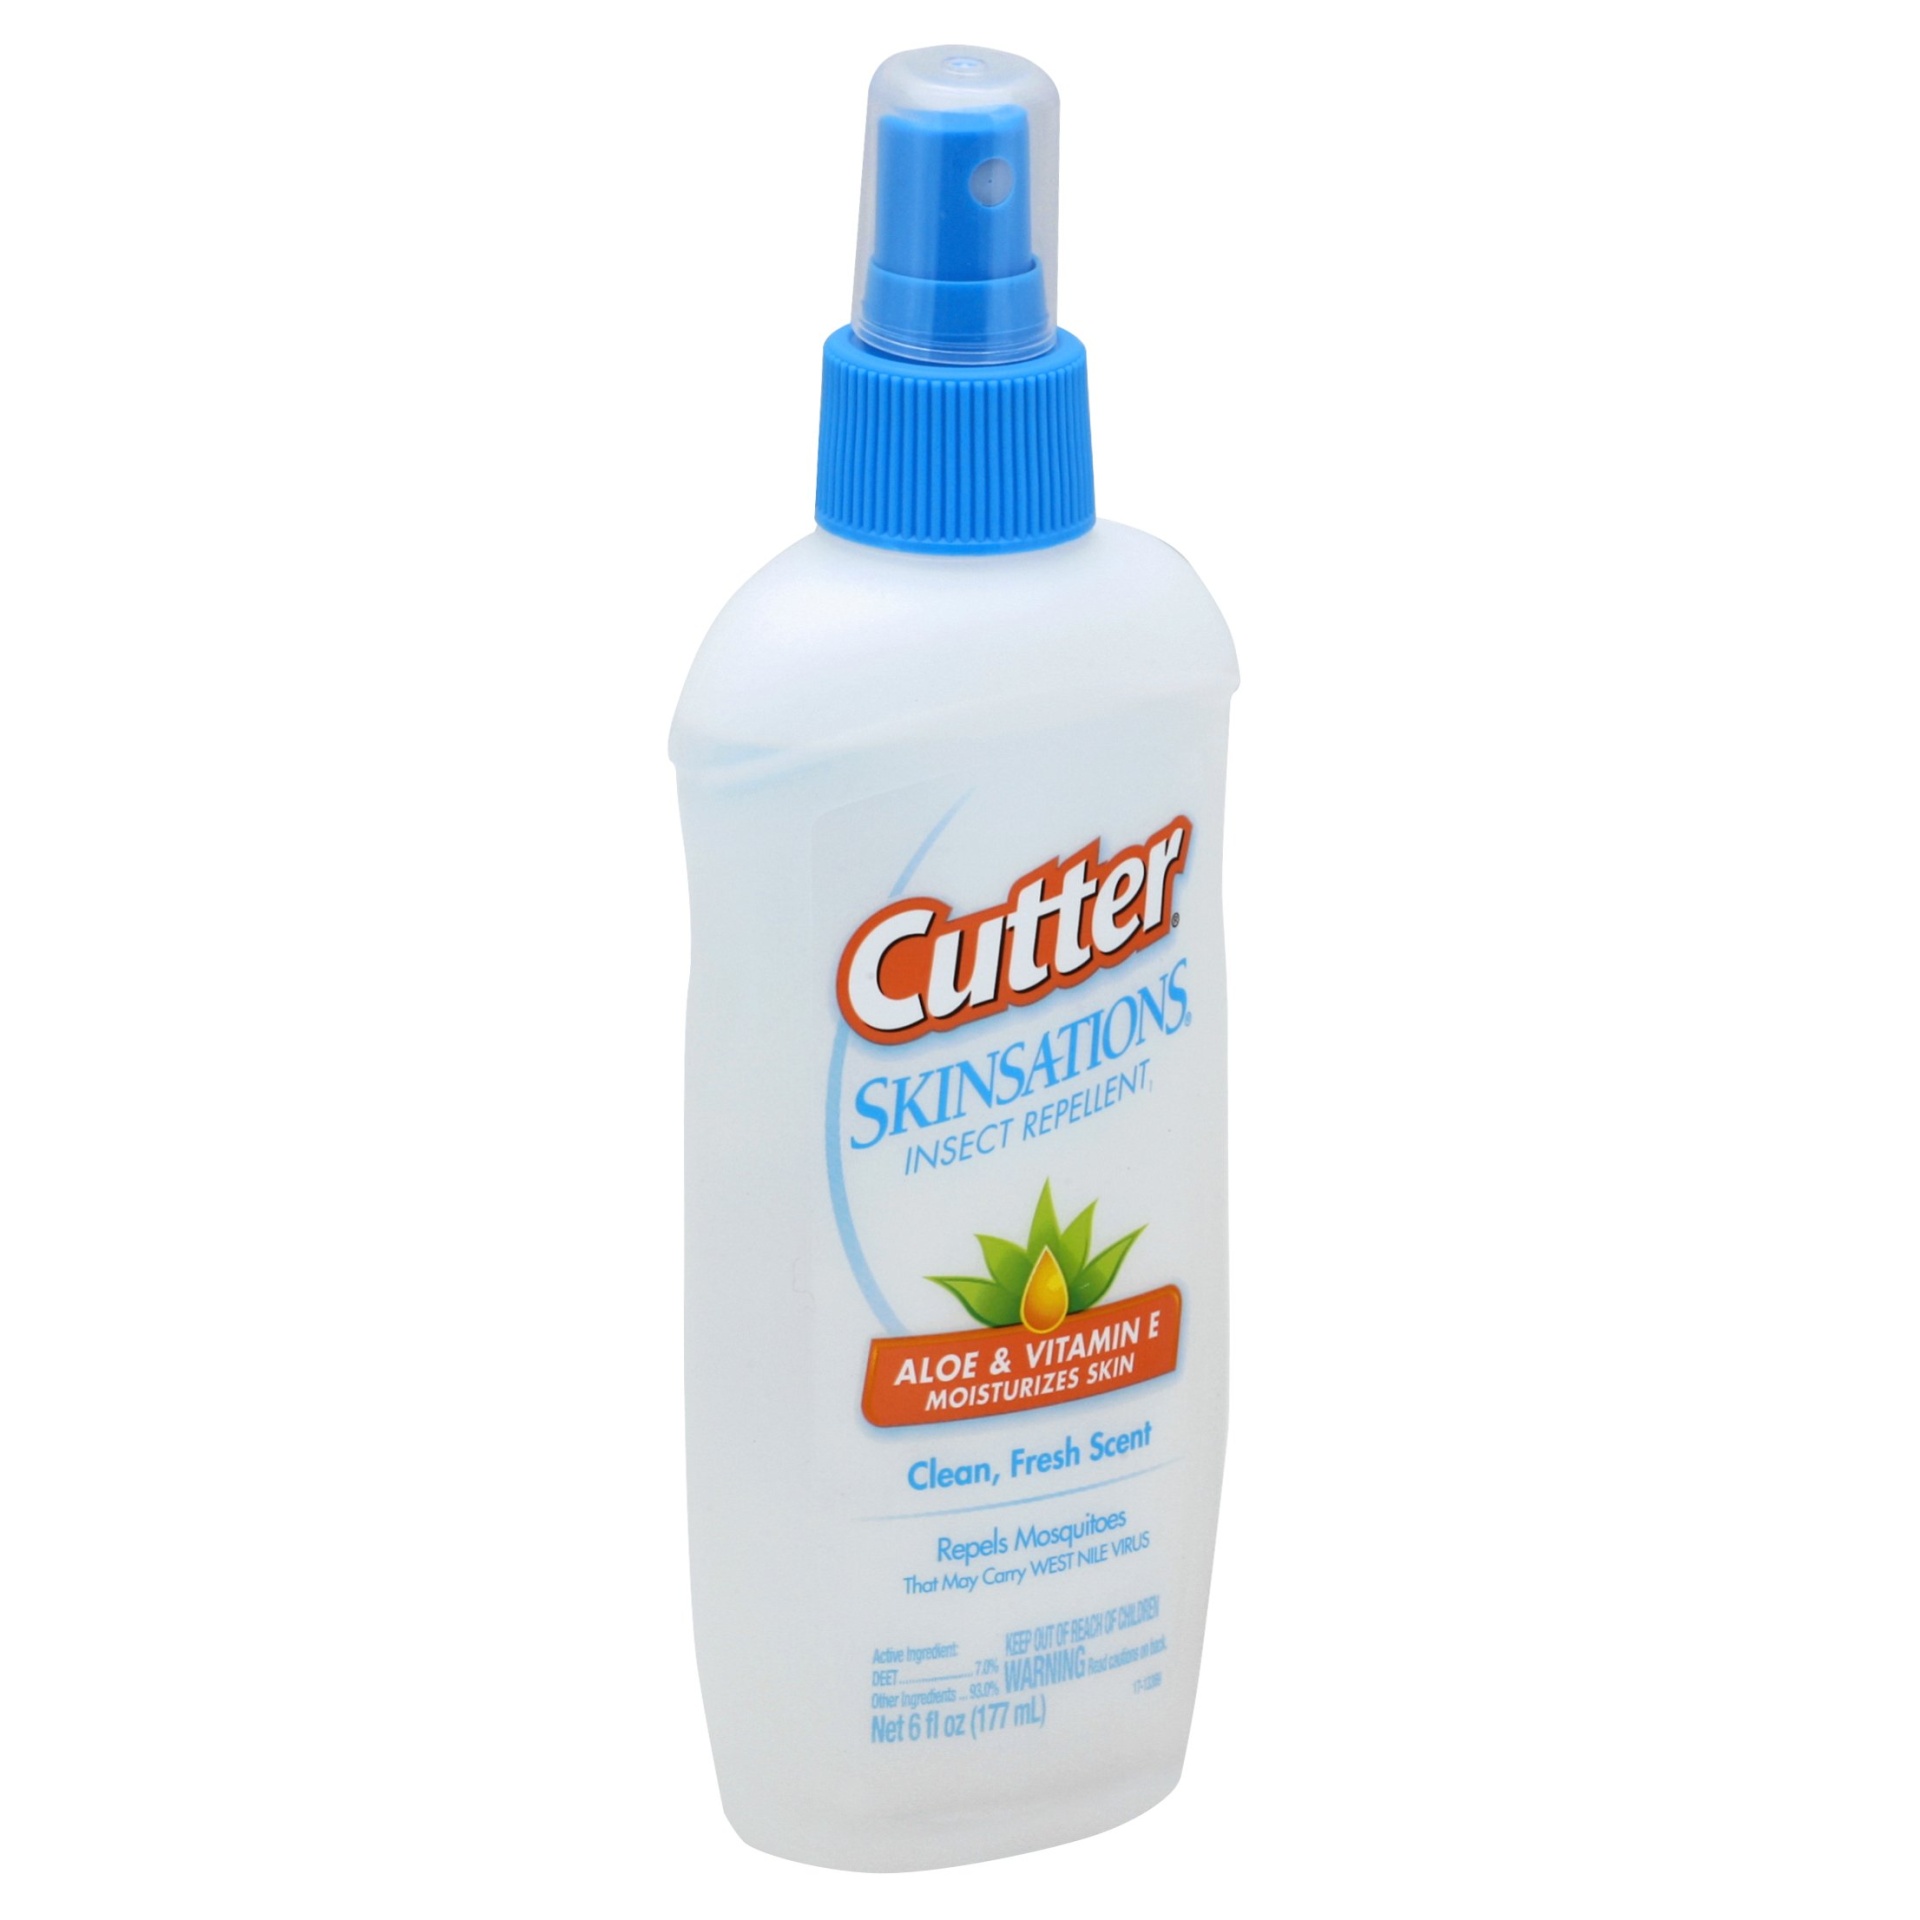 slide 1 of 1, Cutter Skinsations Clean Fresh Scent Insect Repellent Spray, 6 fl oz